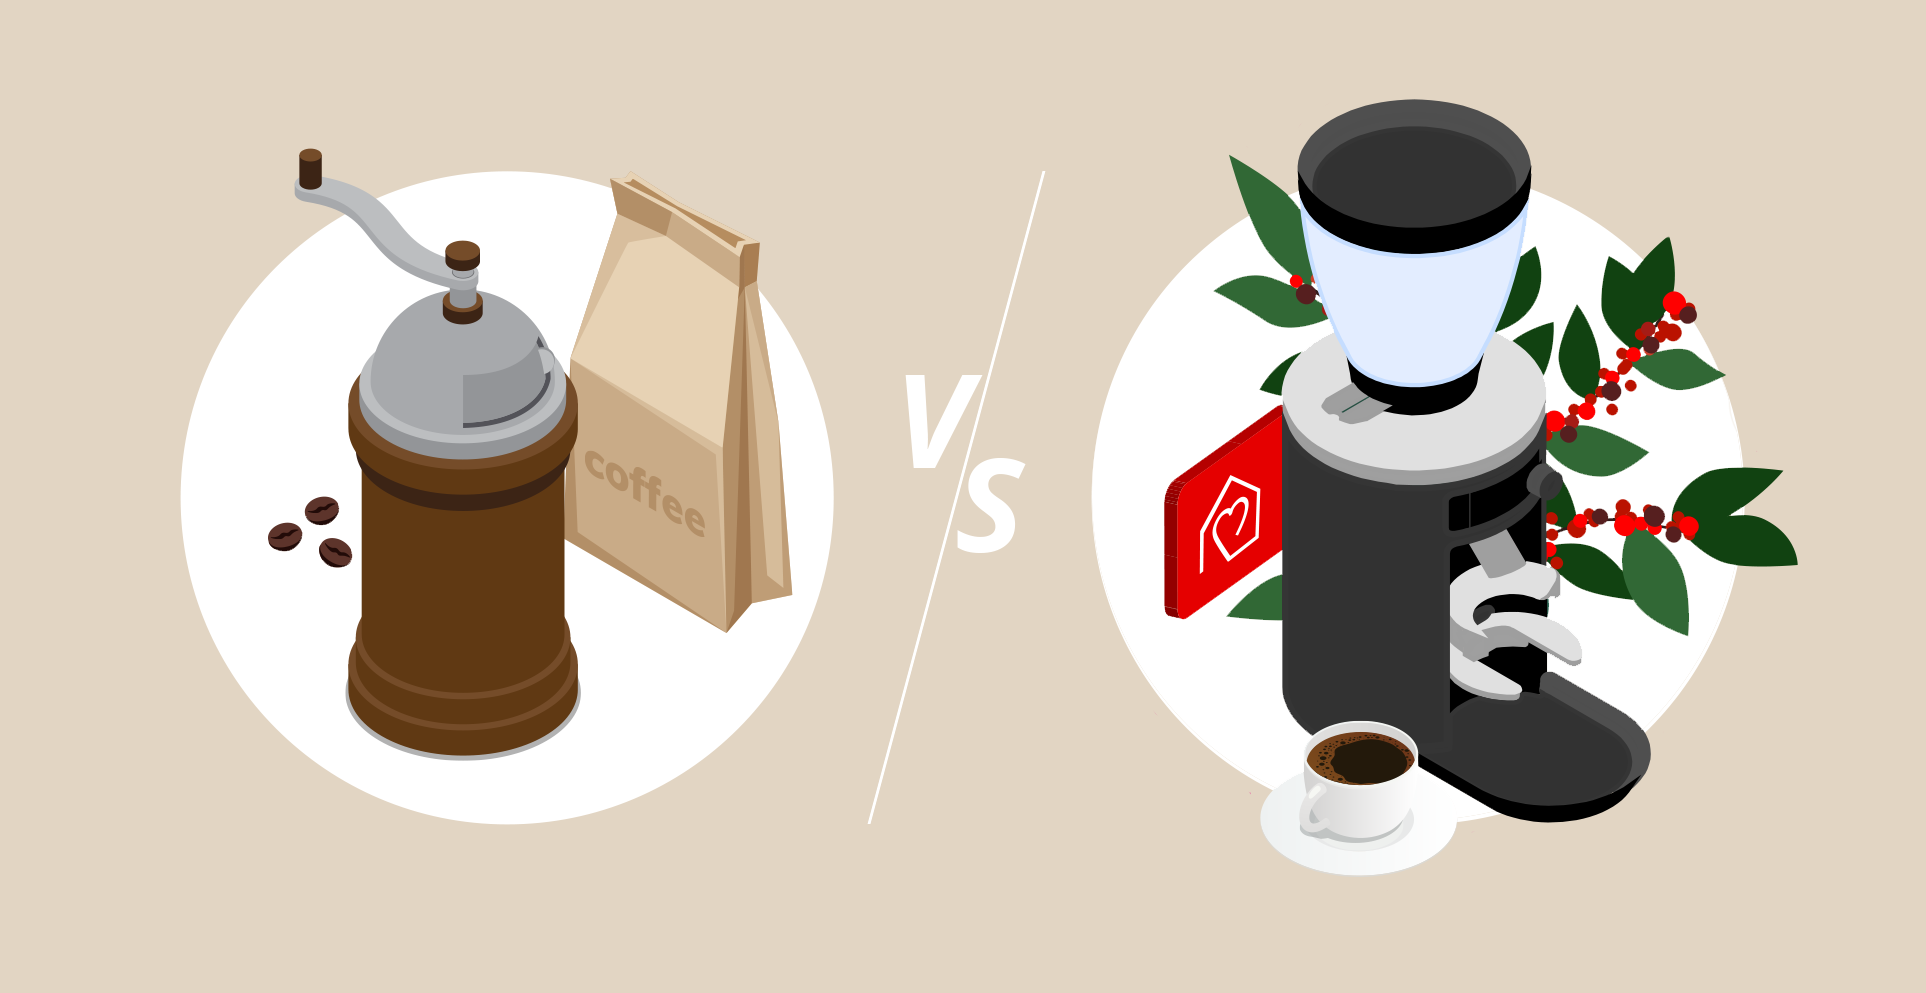 Manual Coffee Grinders vs. Electric: The Pros and Cons of Hand